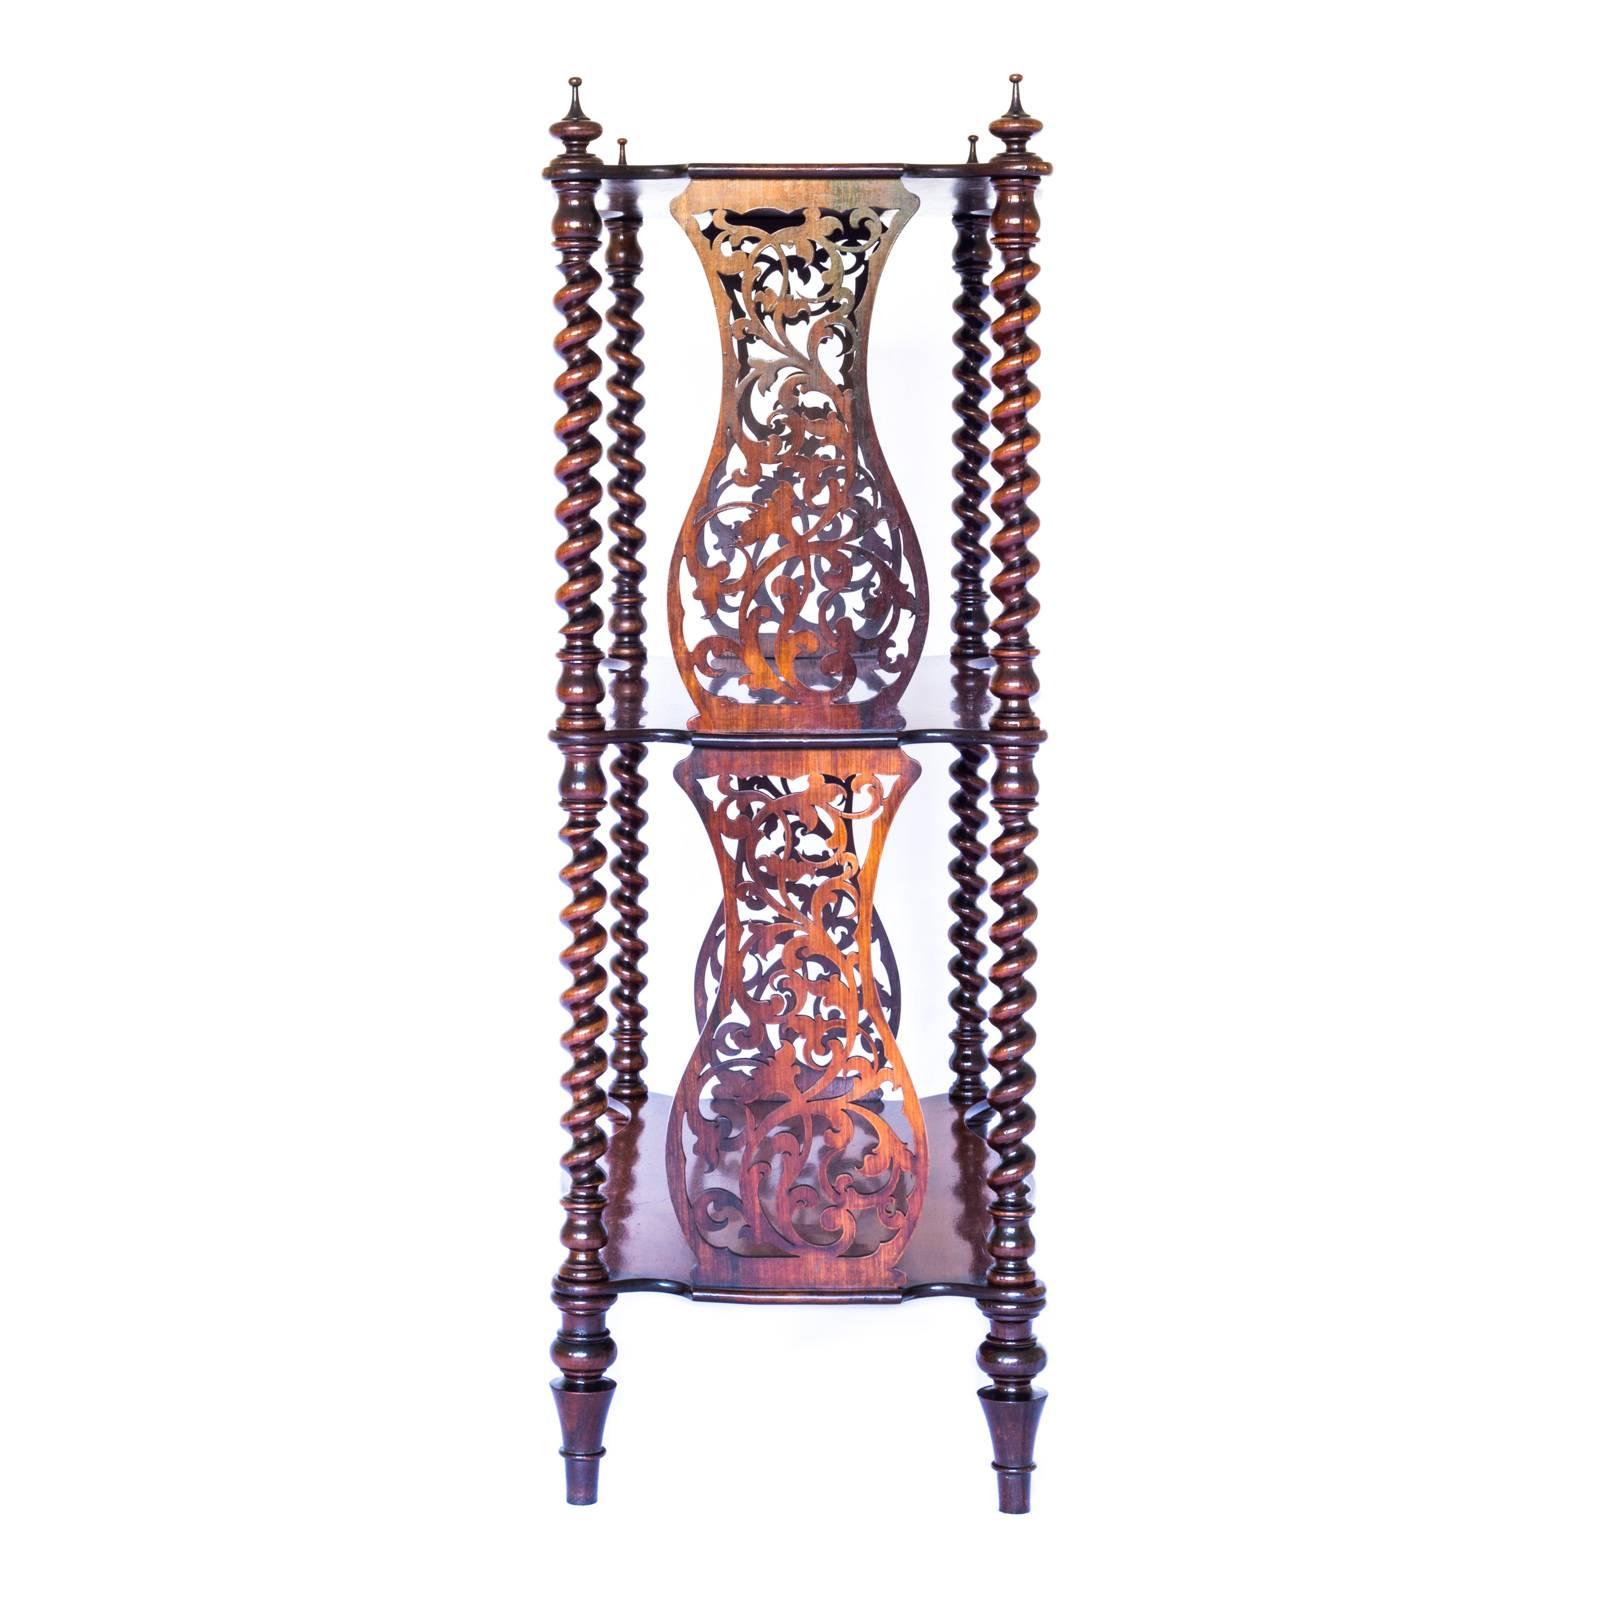 A most unusual early Victorian three tier mahogany etagere, or whatnot, with barley twist columns terminating in finials at the top, and elaborate frets between the serpentine shaped shelves, raised on four turned legs. 

English, c.